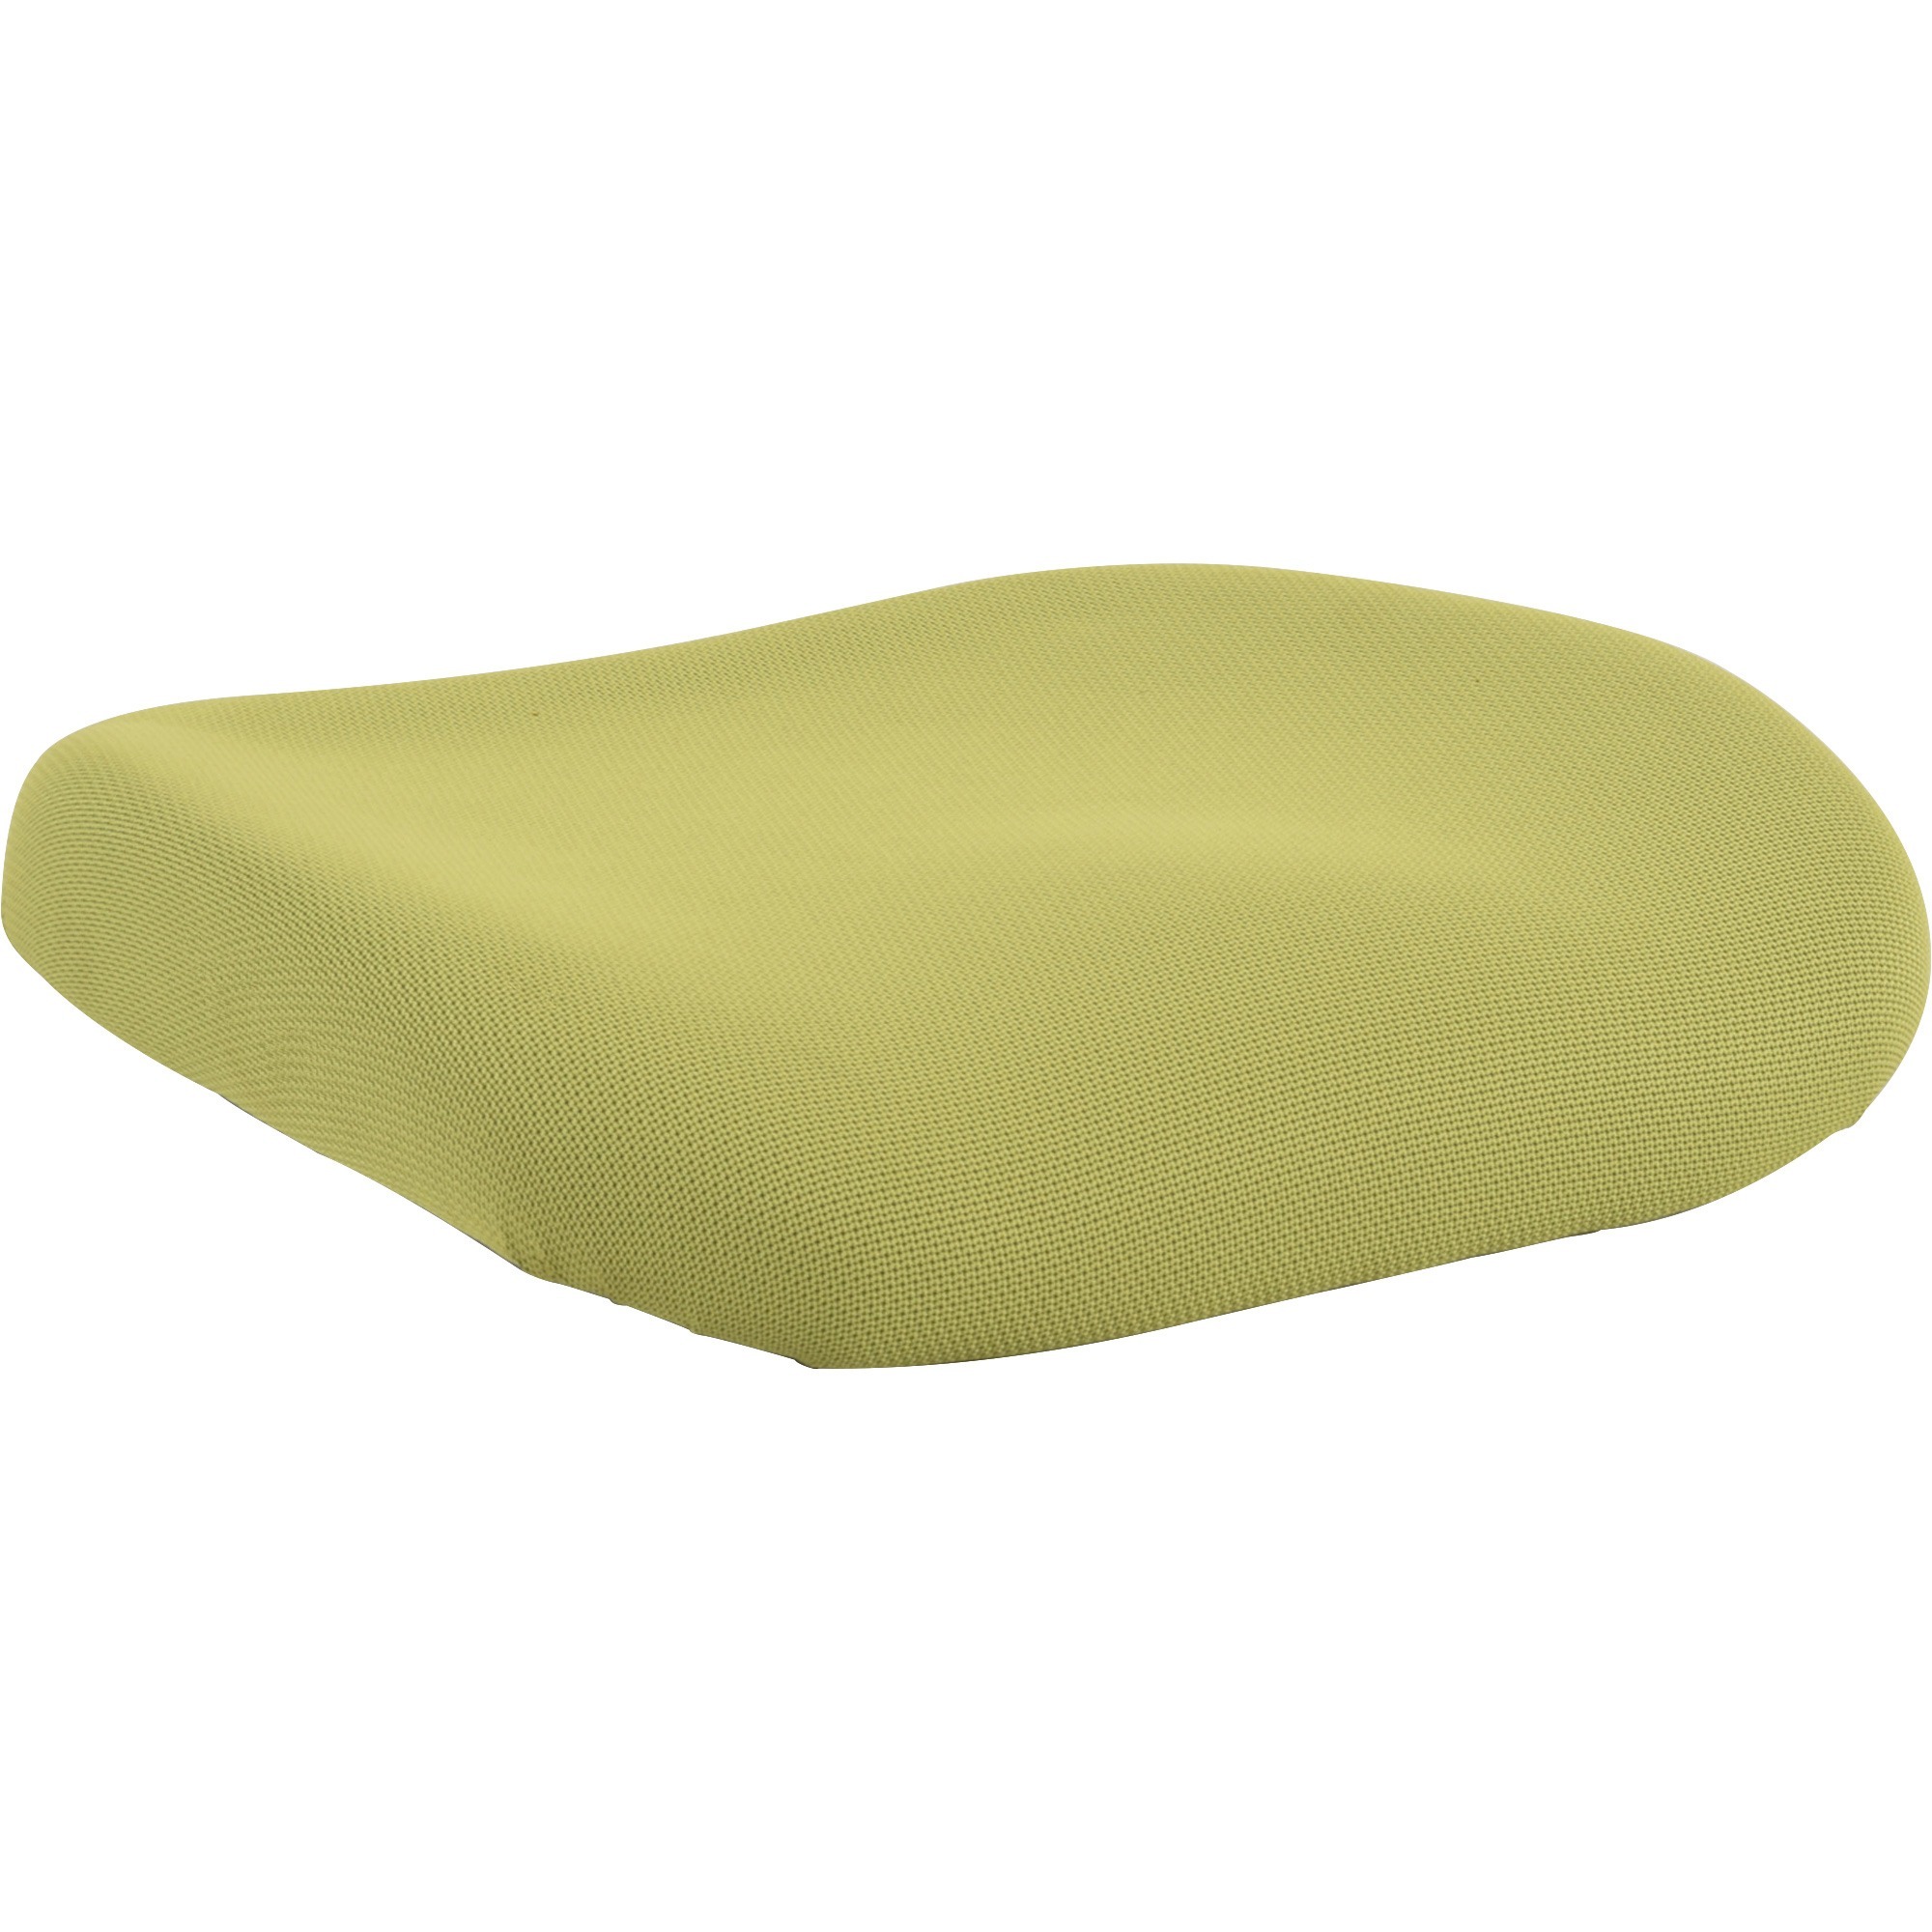 Lorell Padded Fabric Seat Cushion for Conjure Executive LLR62007, LLR 62007  - Office Supply Hut